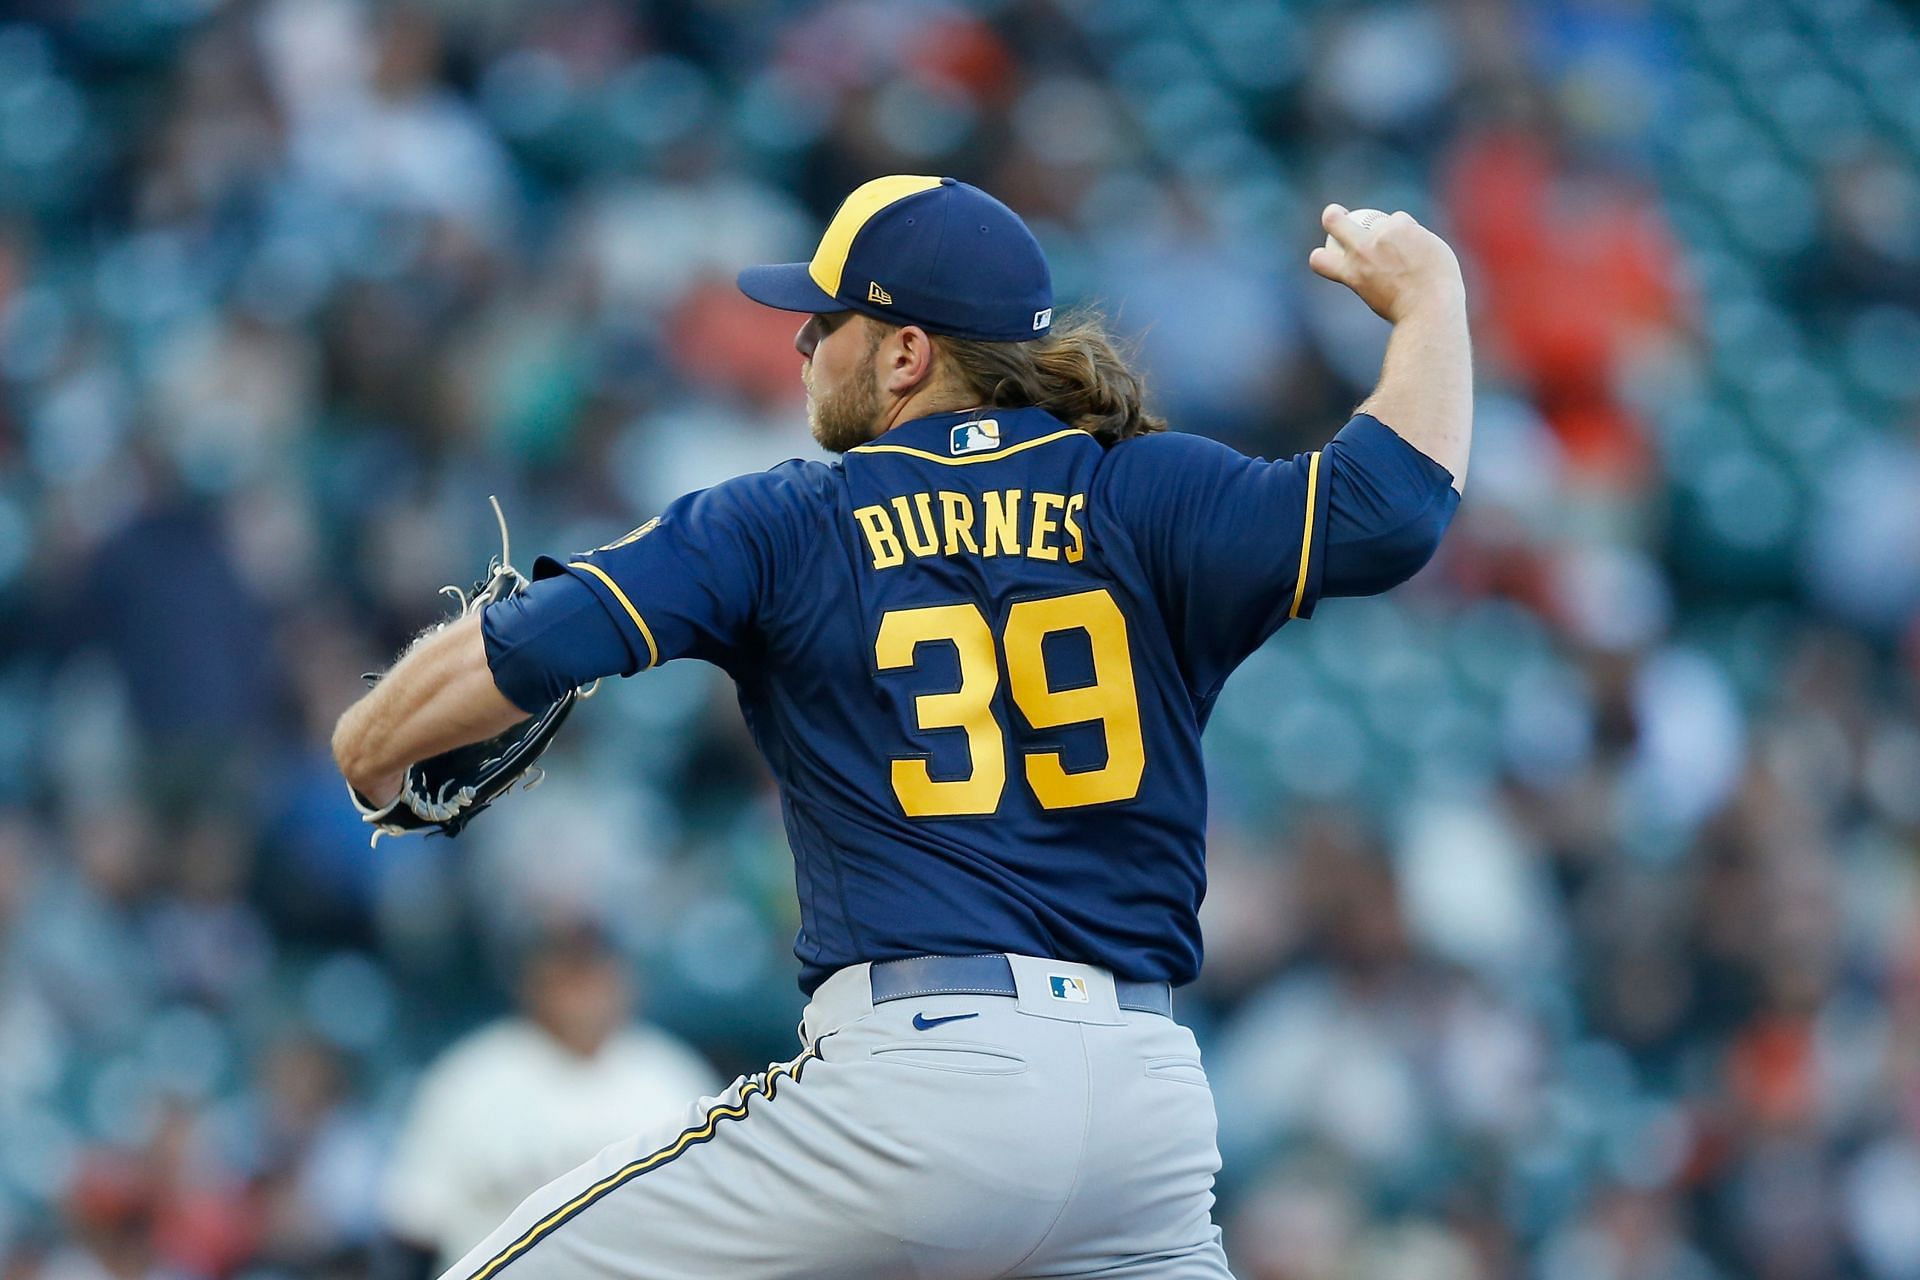 Corbin Burnes has the second most strikeouts in the league with 187.